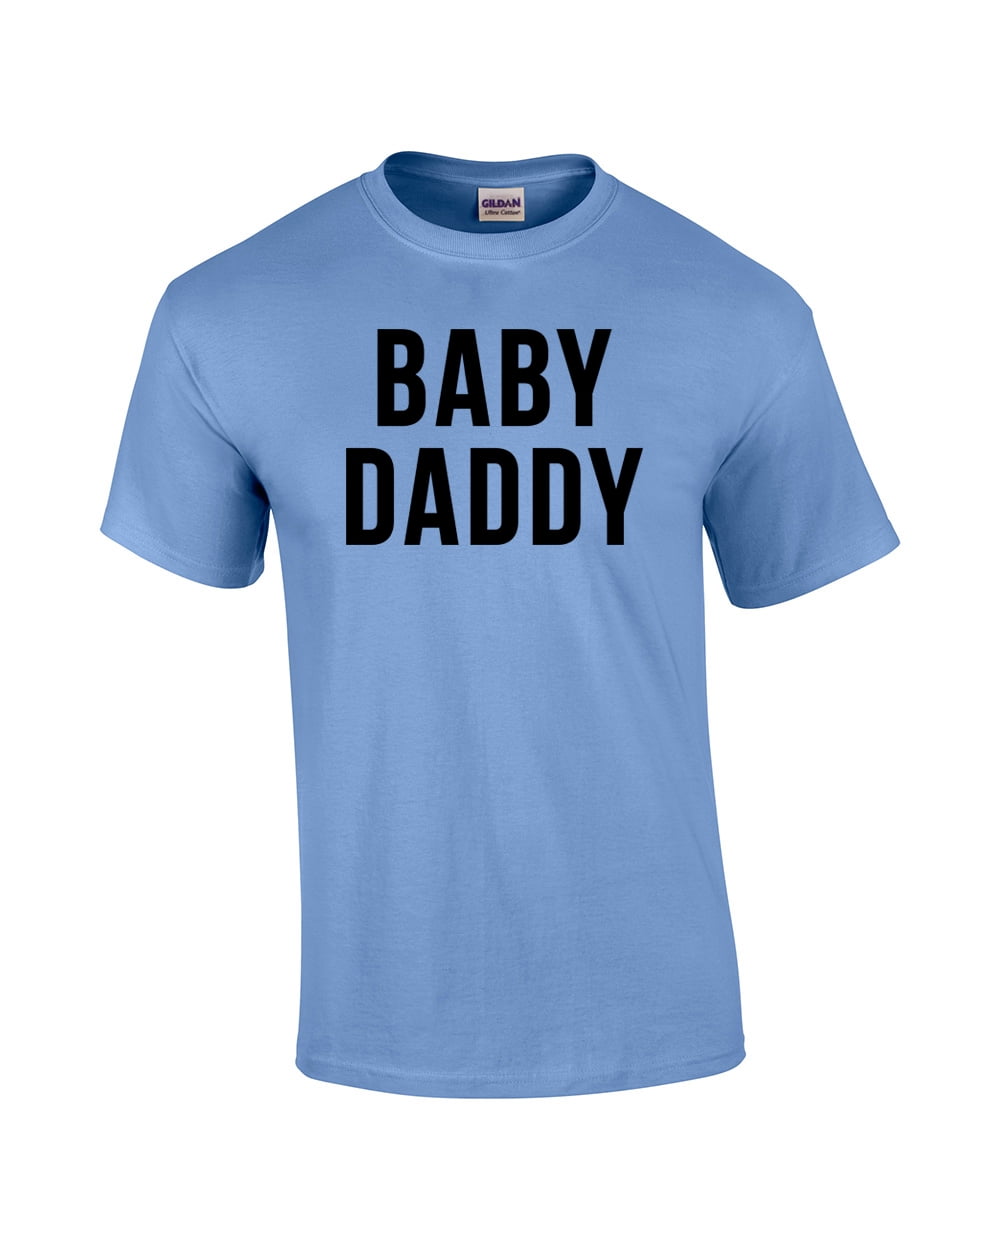 Baby Daddy Mens Tee Shirt Pick Size Color Small-6XL 